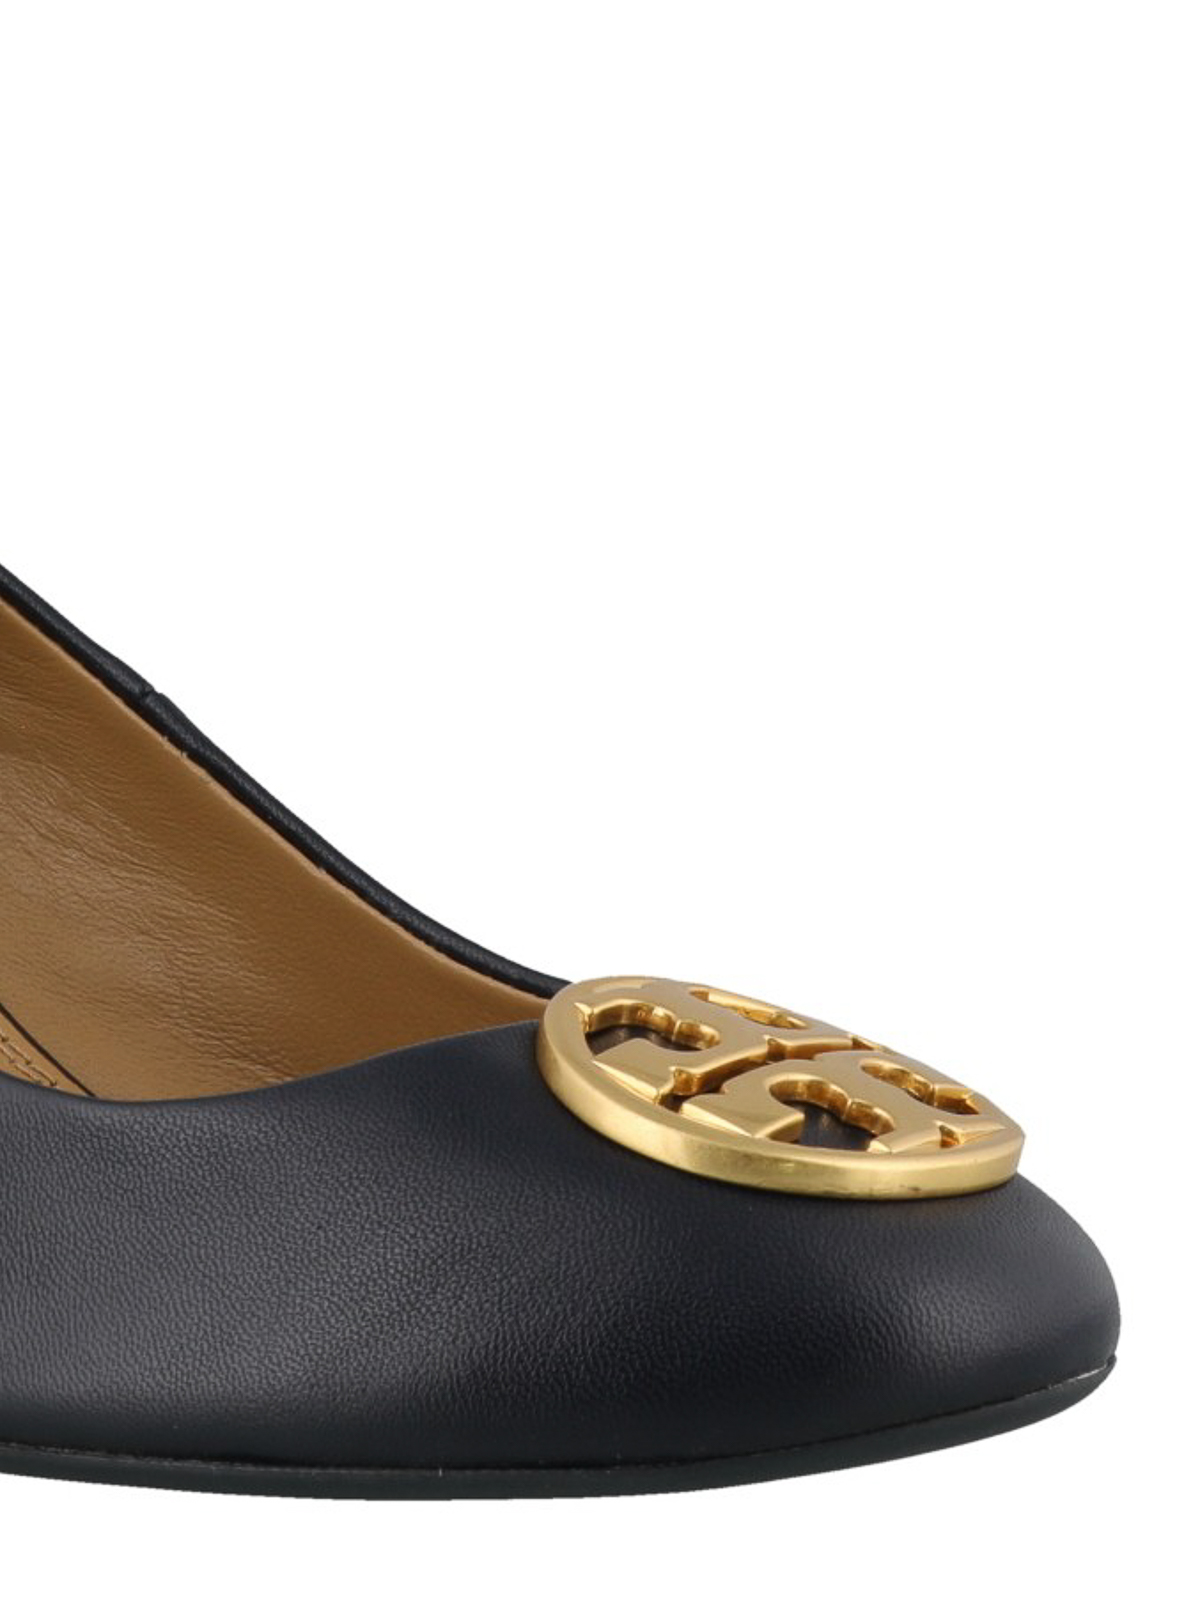 Court shoes Tory Burch - Chelsea wedge detailed leather pumps - 45899430